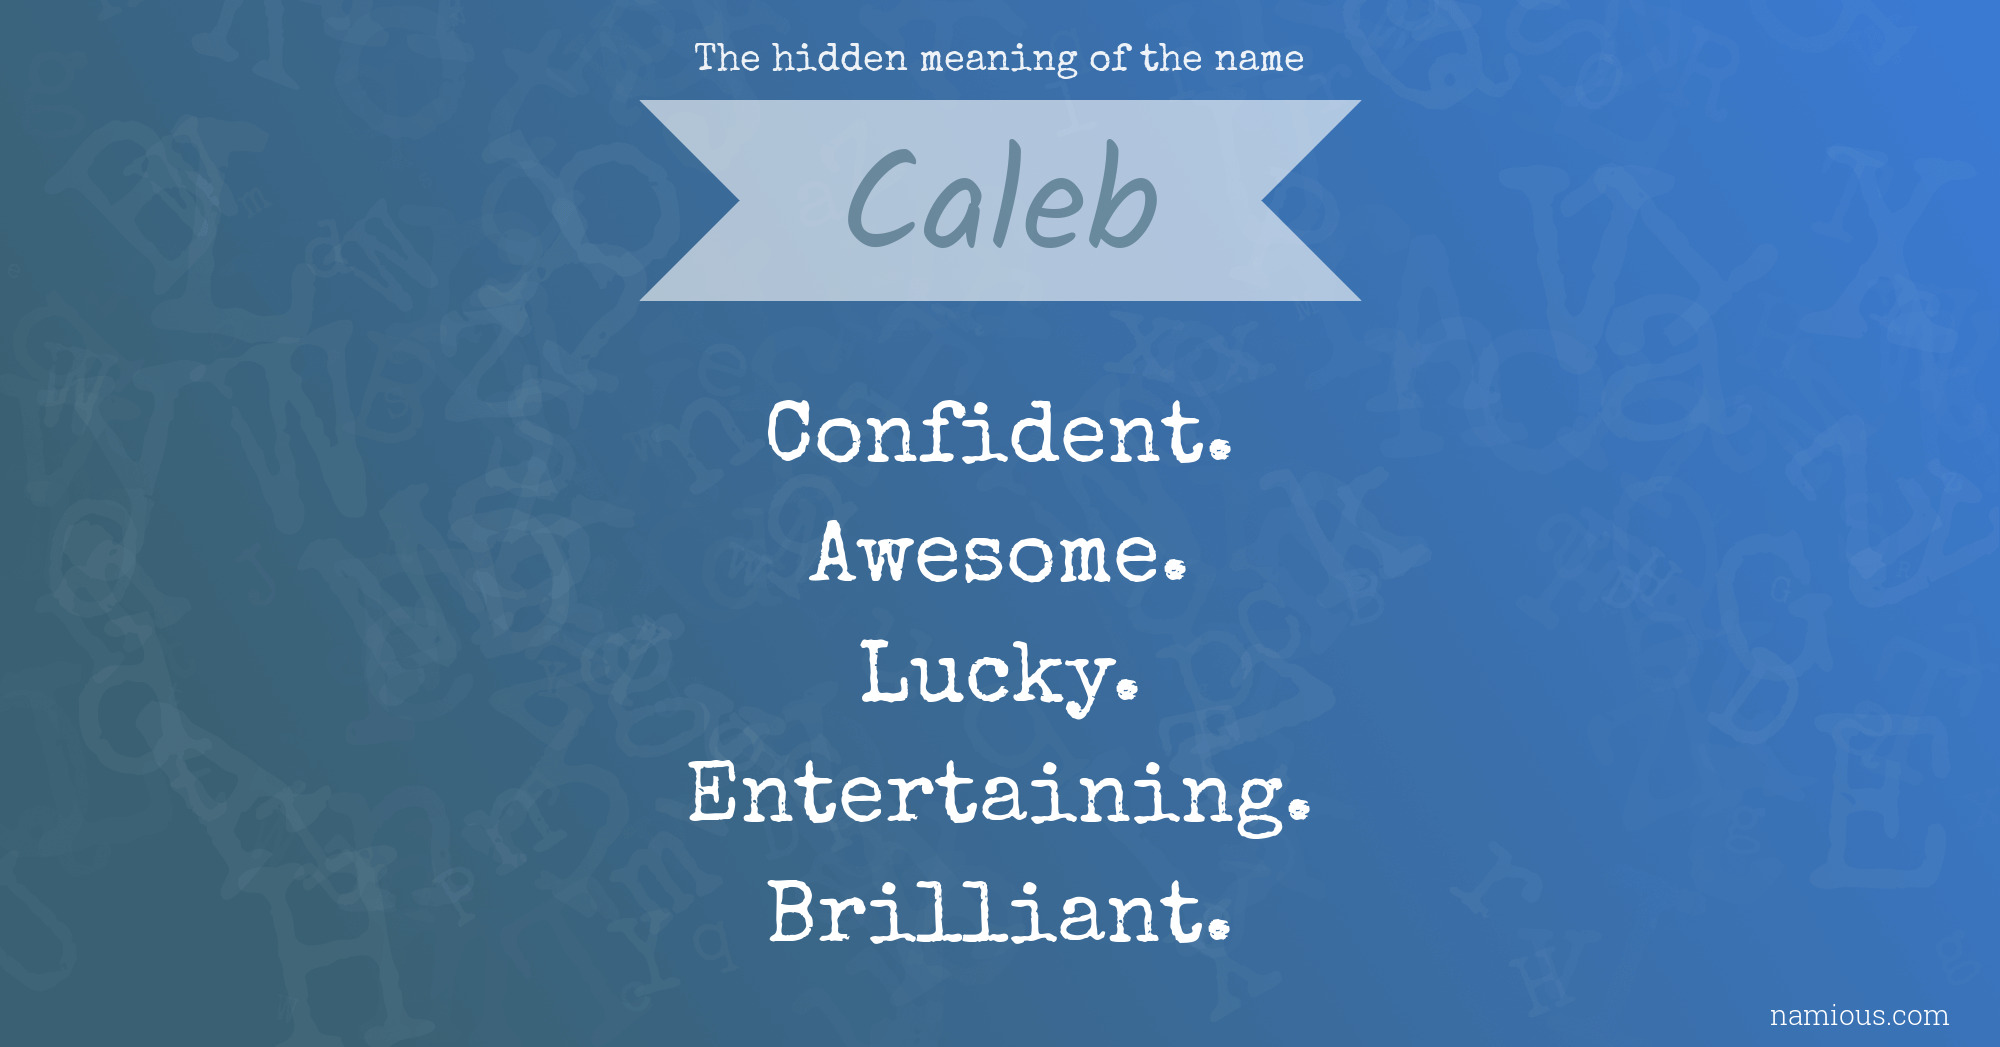 The hidden meaning of the name Caleb